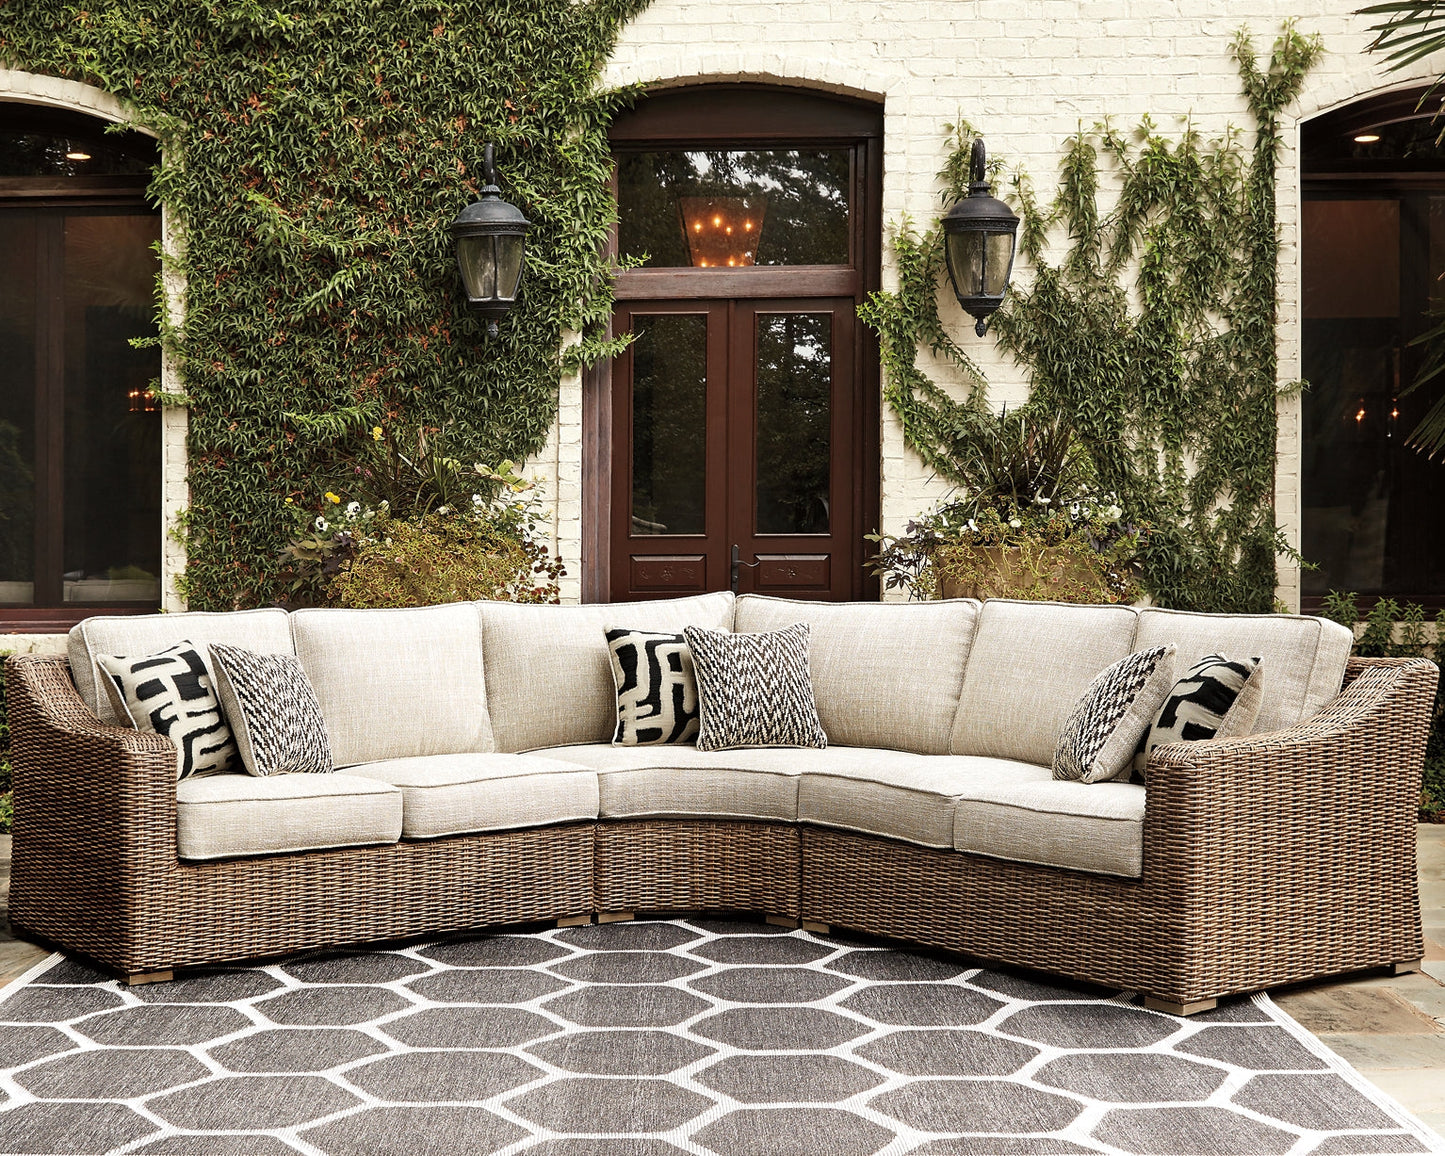 Beachcroft 3-Piece Outdoor Seating Set at Walker Mattress and Furniture Locations in Cedar Park and Belton TX.